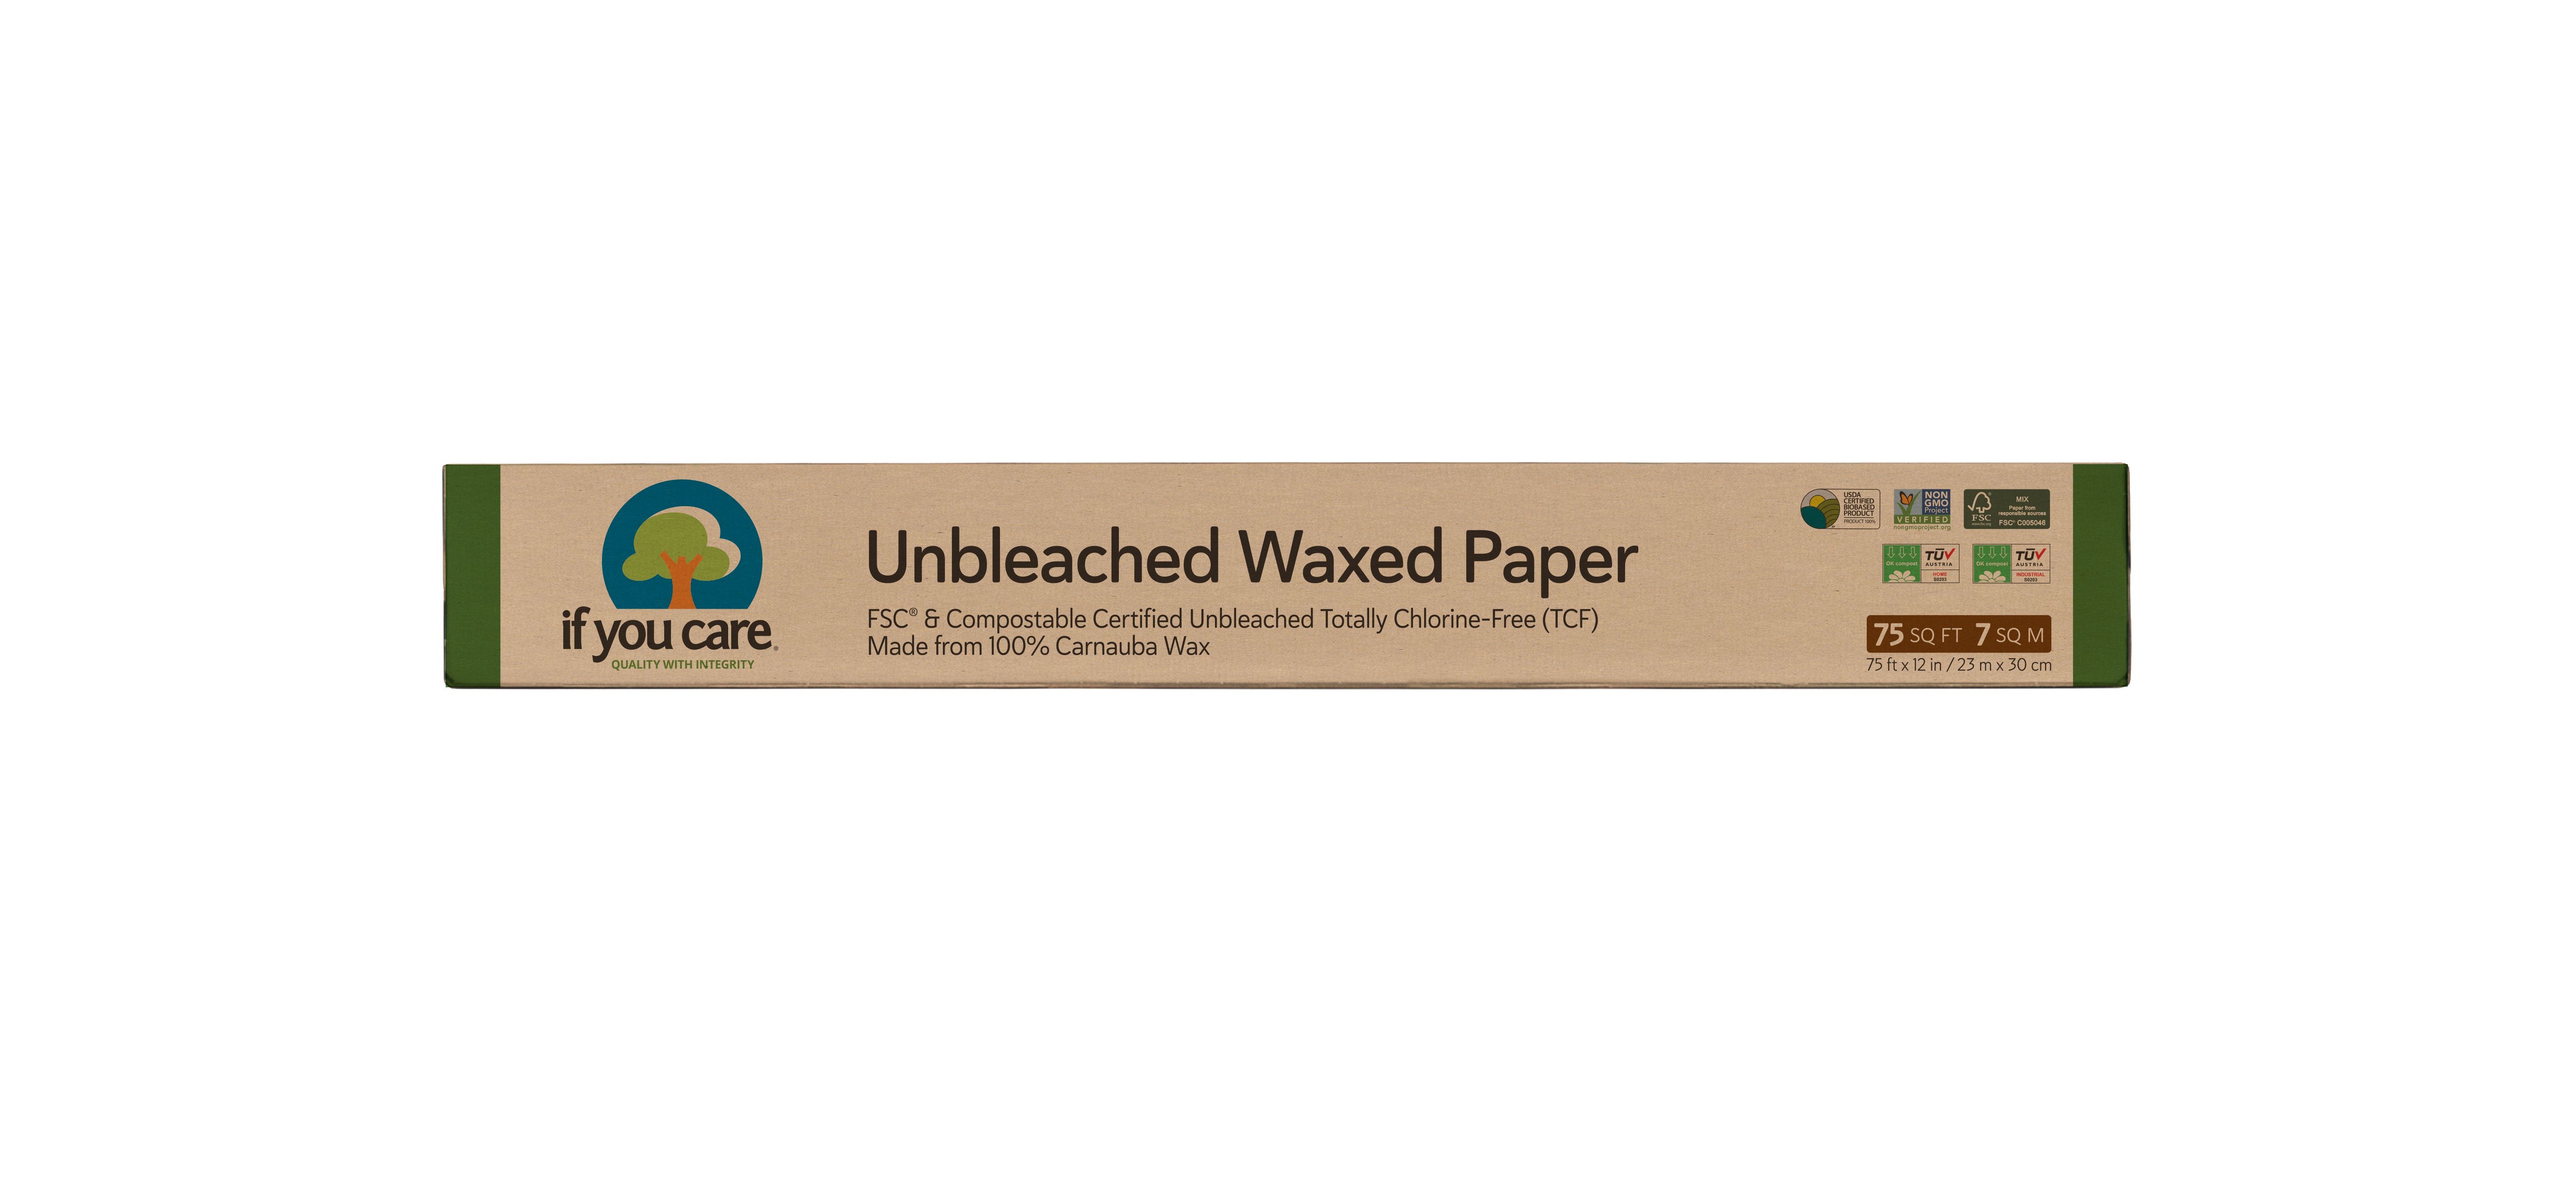 If You Care Unbleached Waxed Paper